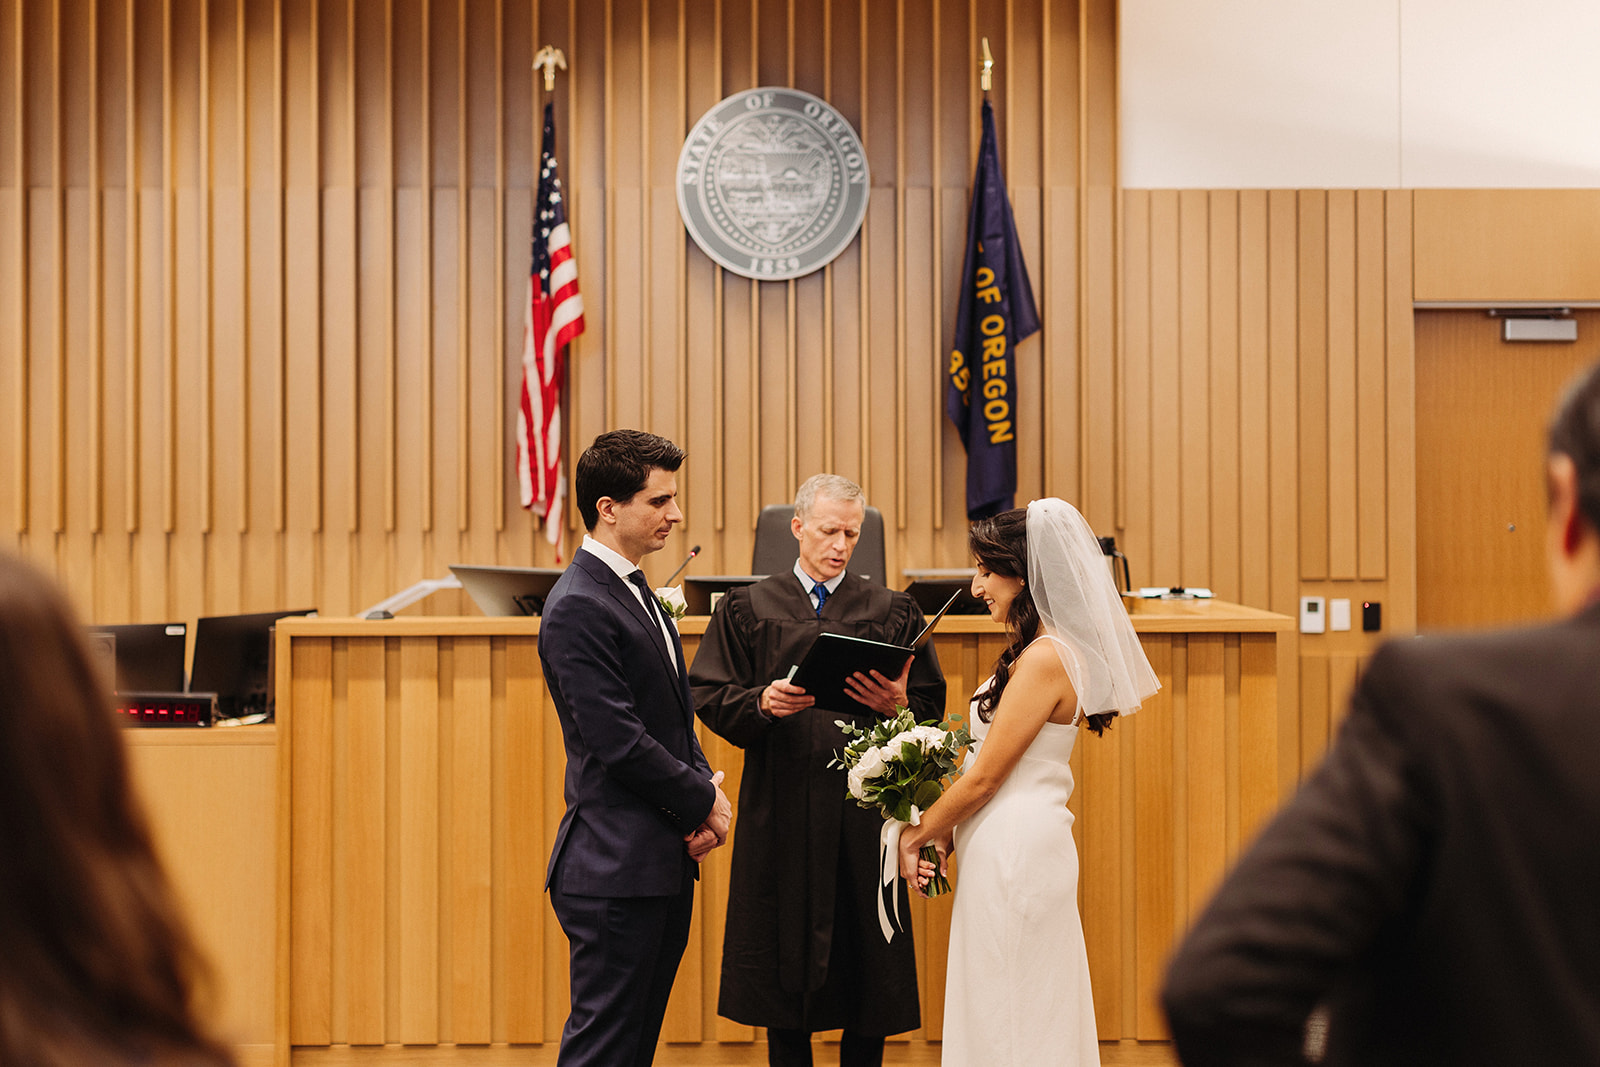 Inside view of the multnomah county courthouse wedding